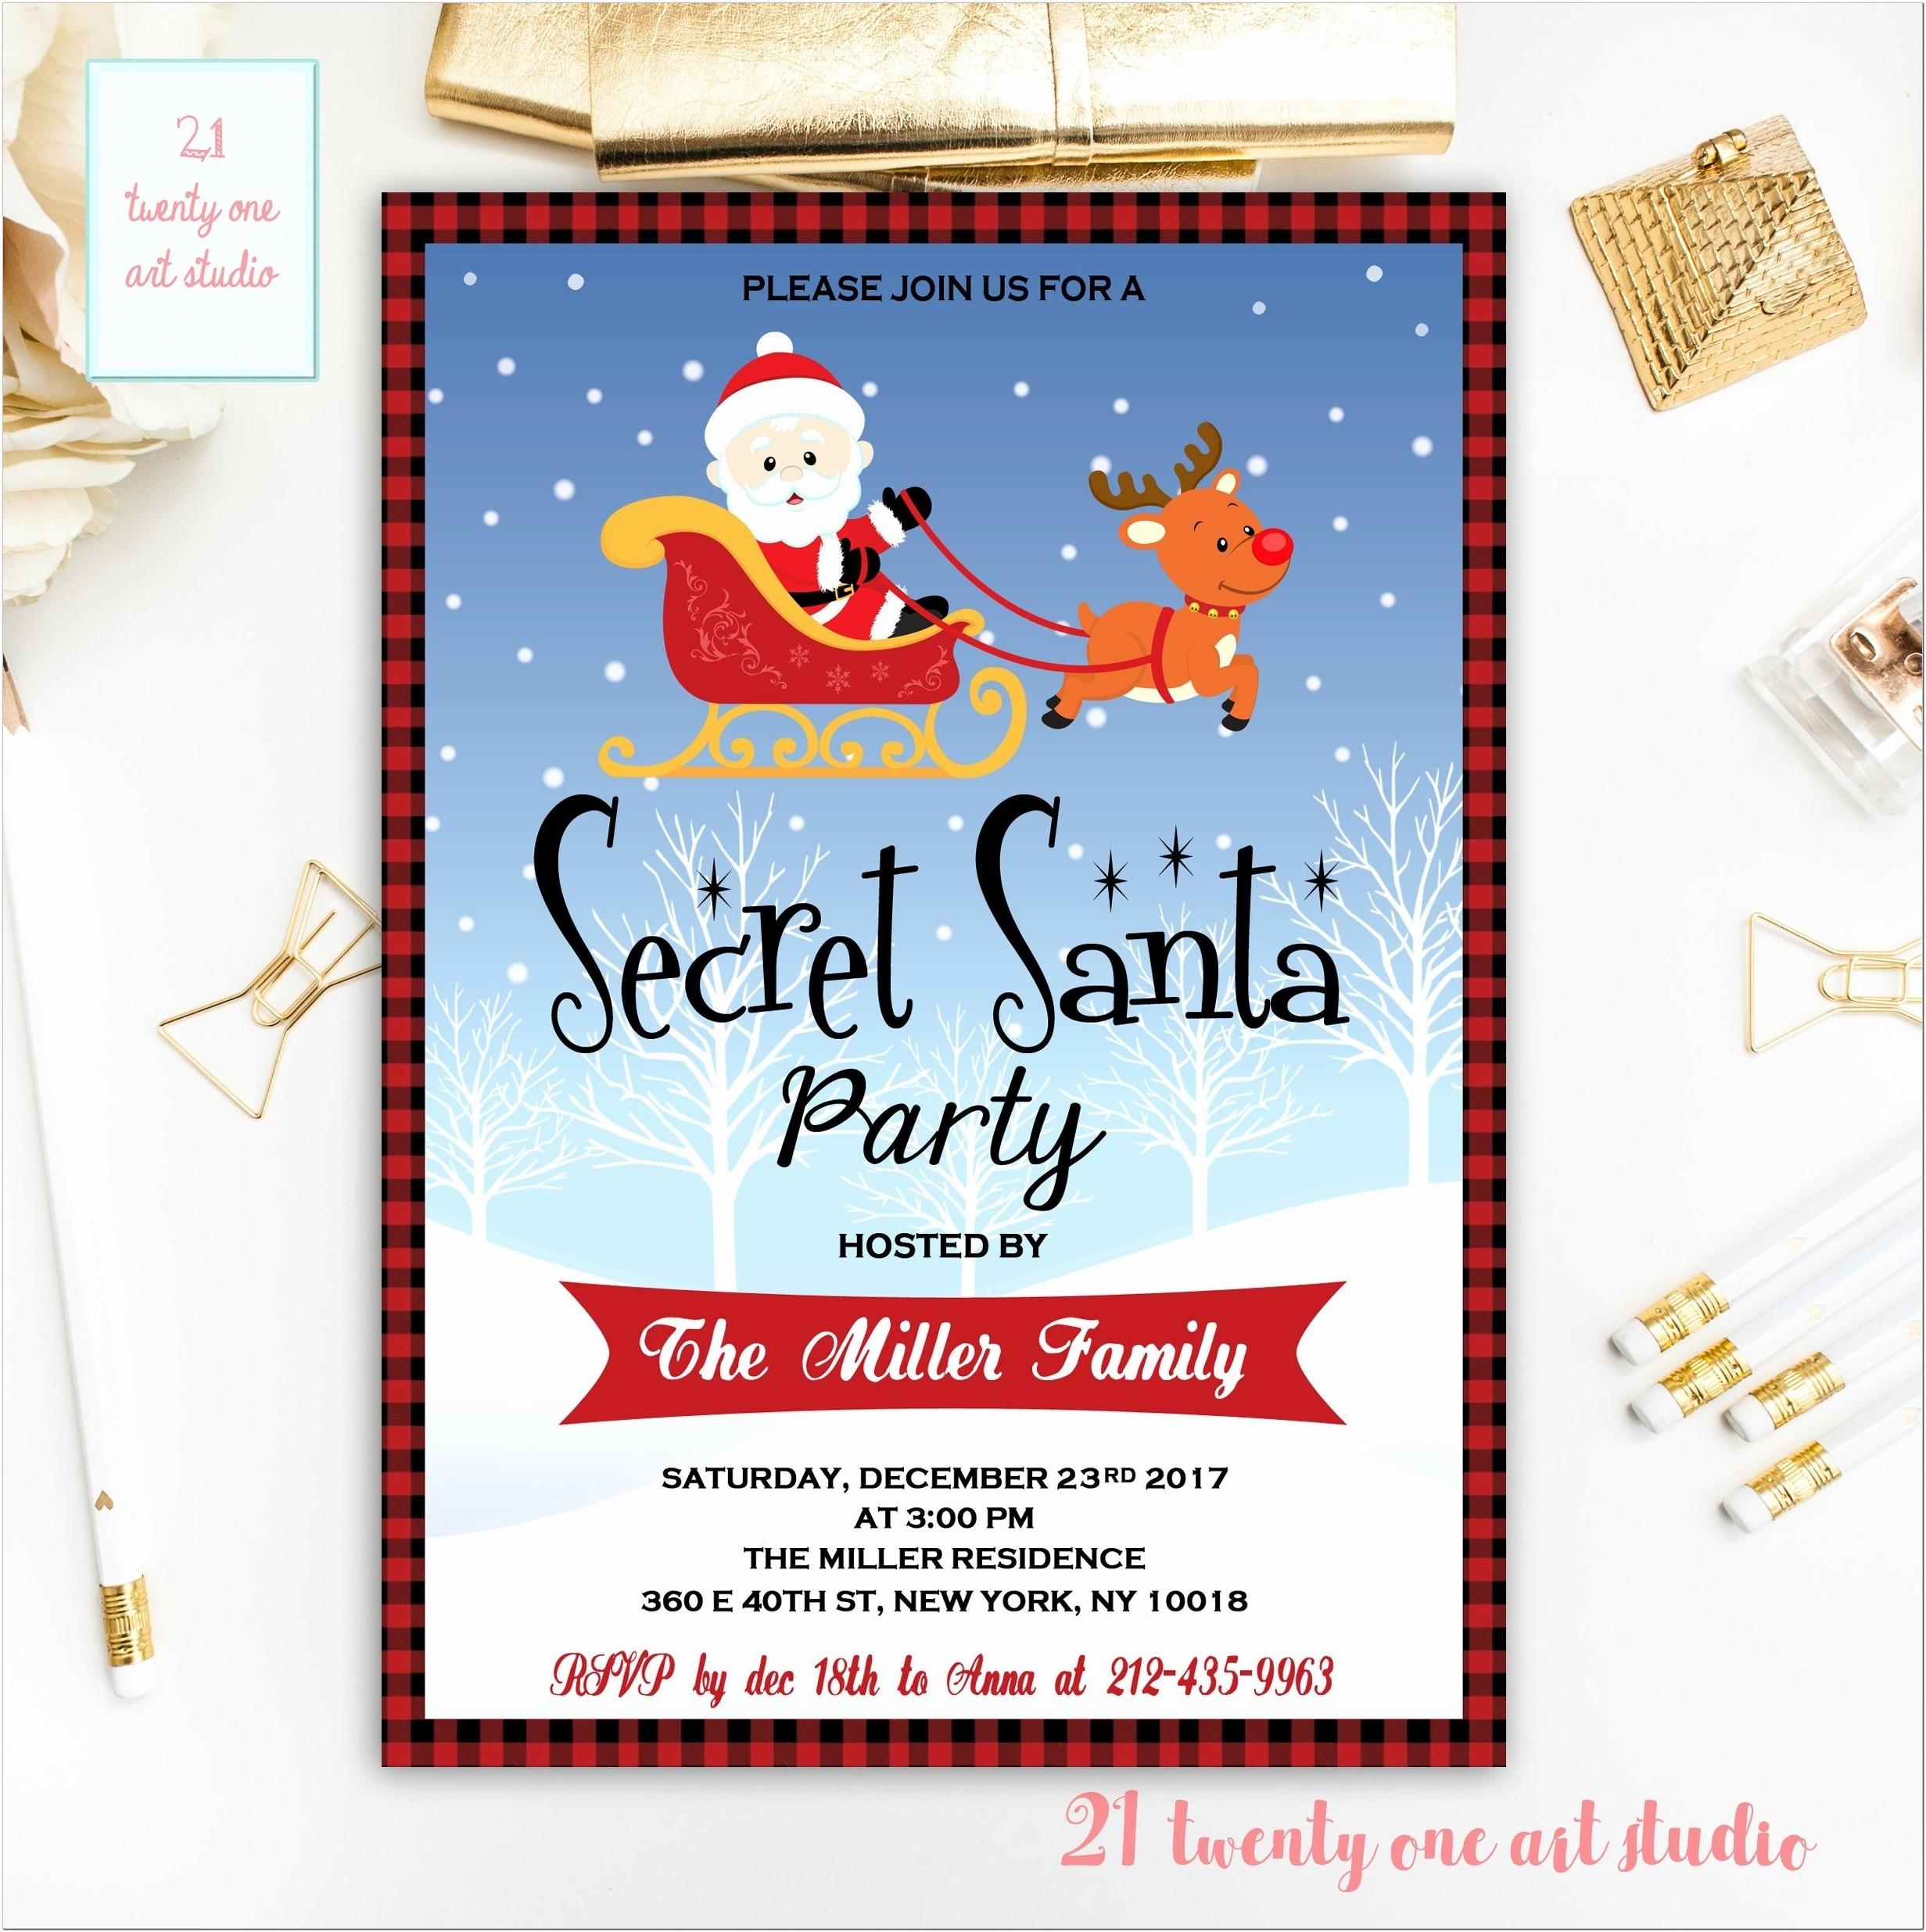 happy-birthday-invitation-card-design-in-ms-word-download-free-template